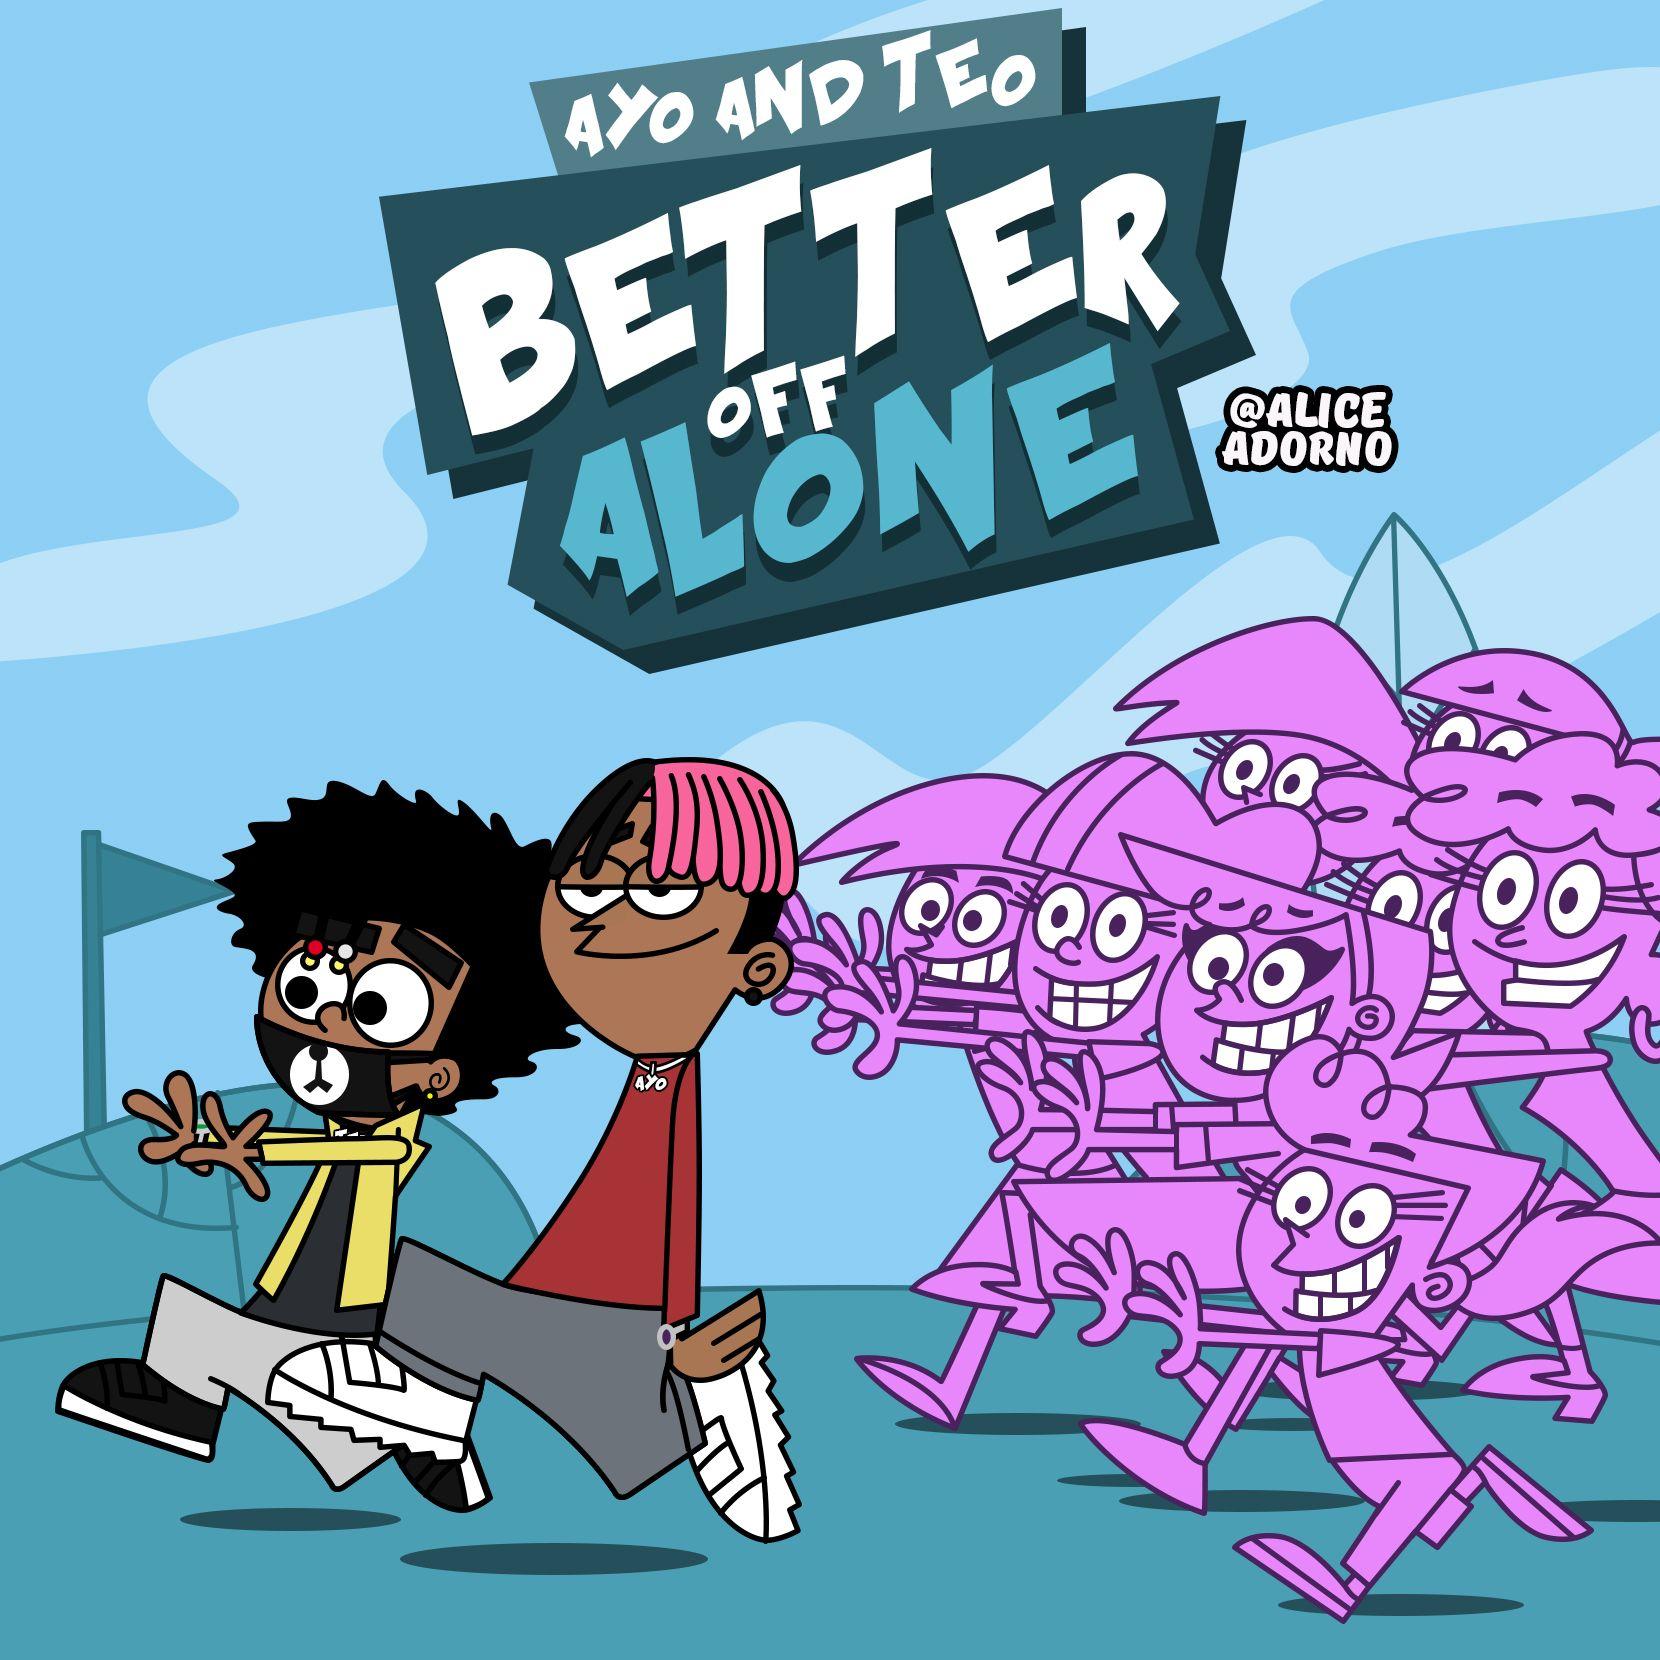 Better off Alone and Teo artwork made